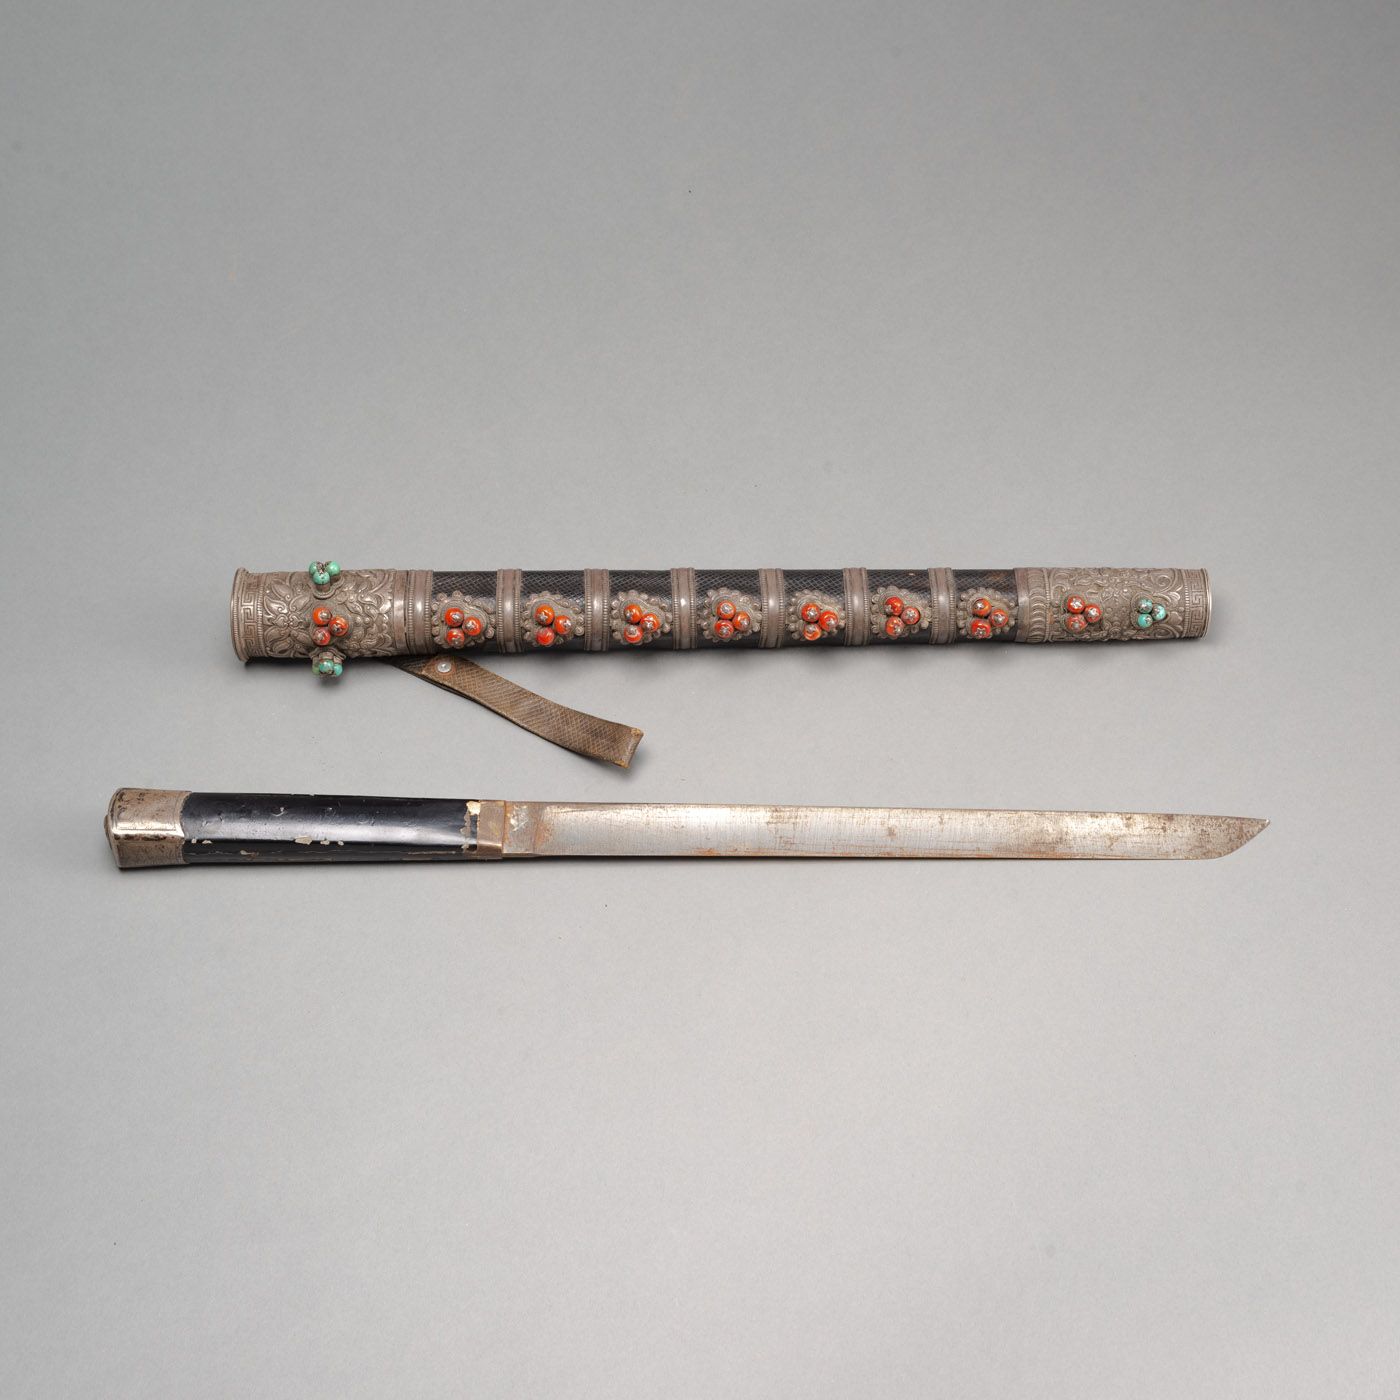 A SHORTSWORD WITH TURQUOISE- AND CORAL-INLAID SHEATH